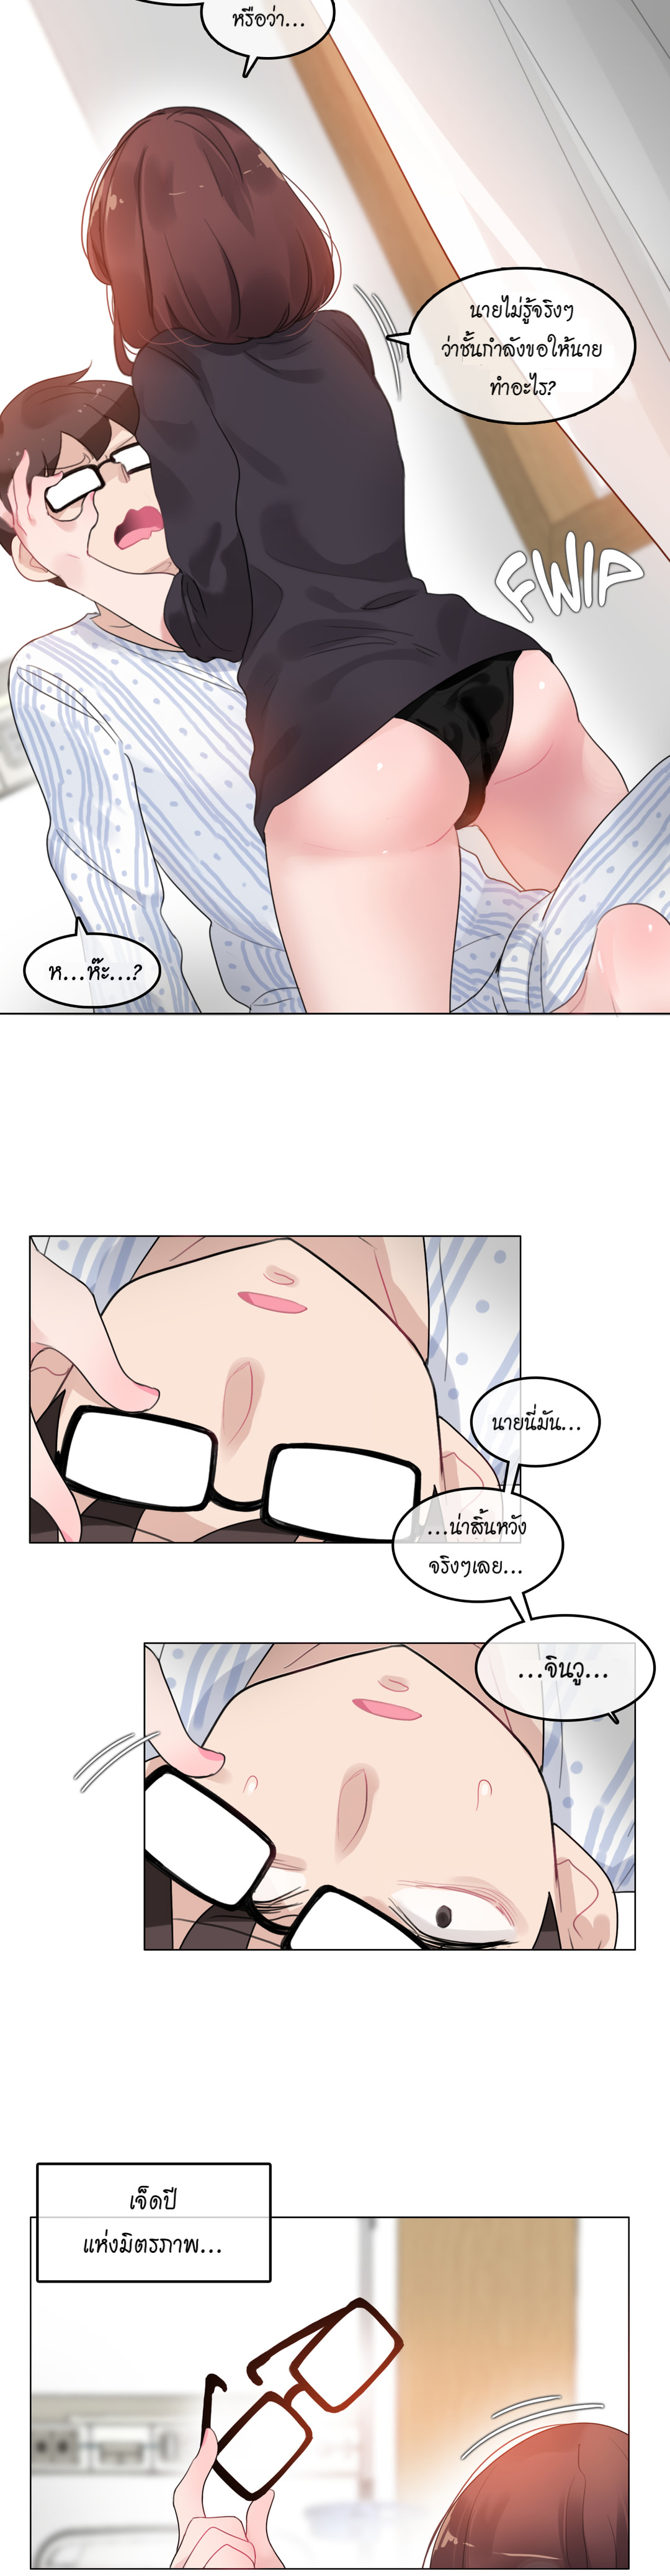 A Pervert’s Daily Life50 (14)